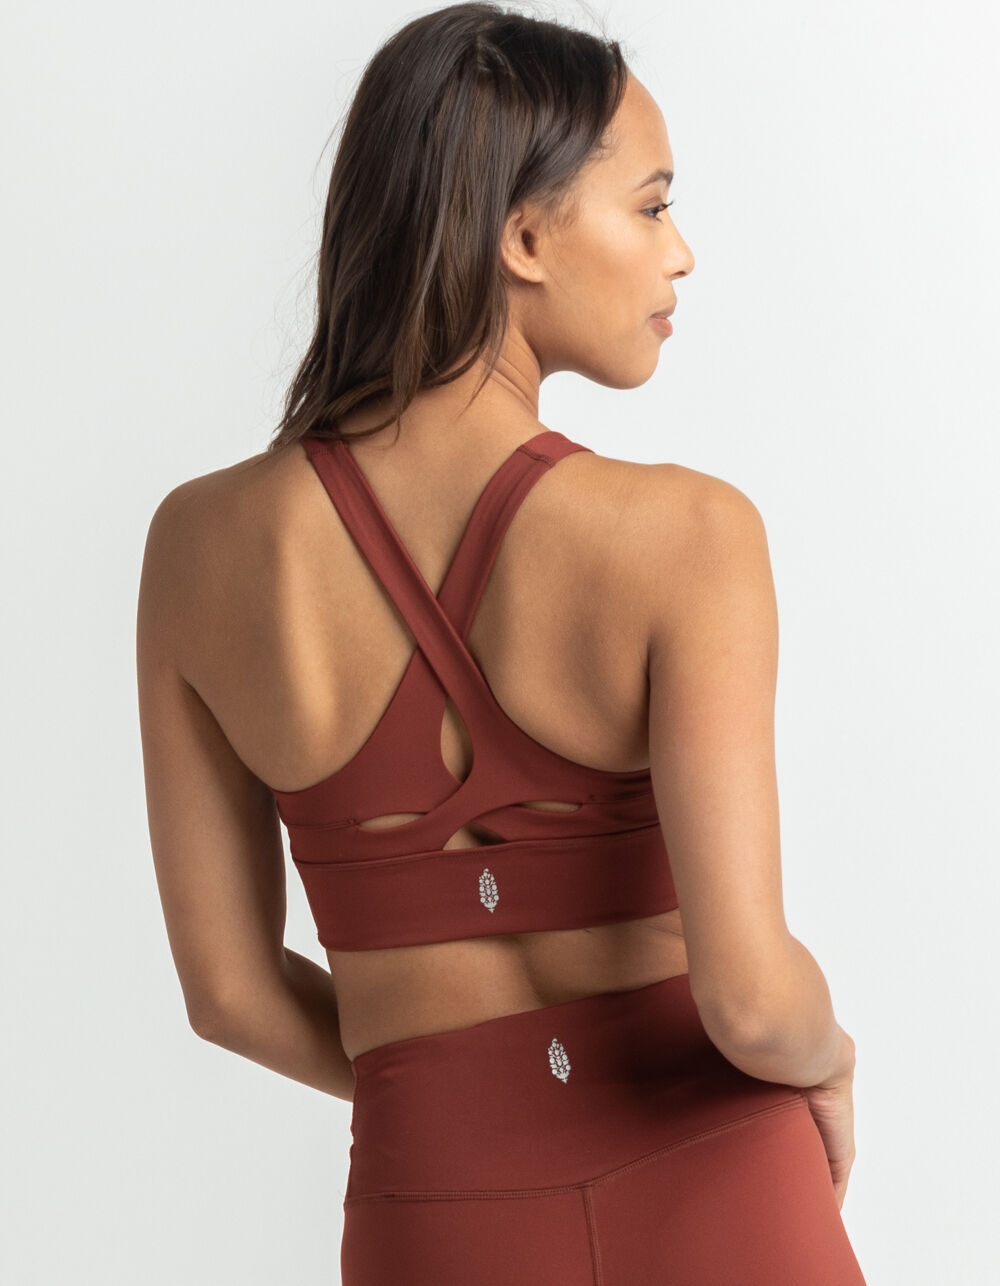 FREE PEOPLE MOVEMENT In Your Corner Sports Bra - SUNBAKED